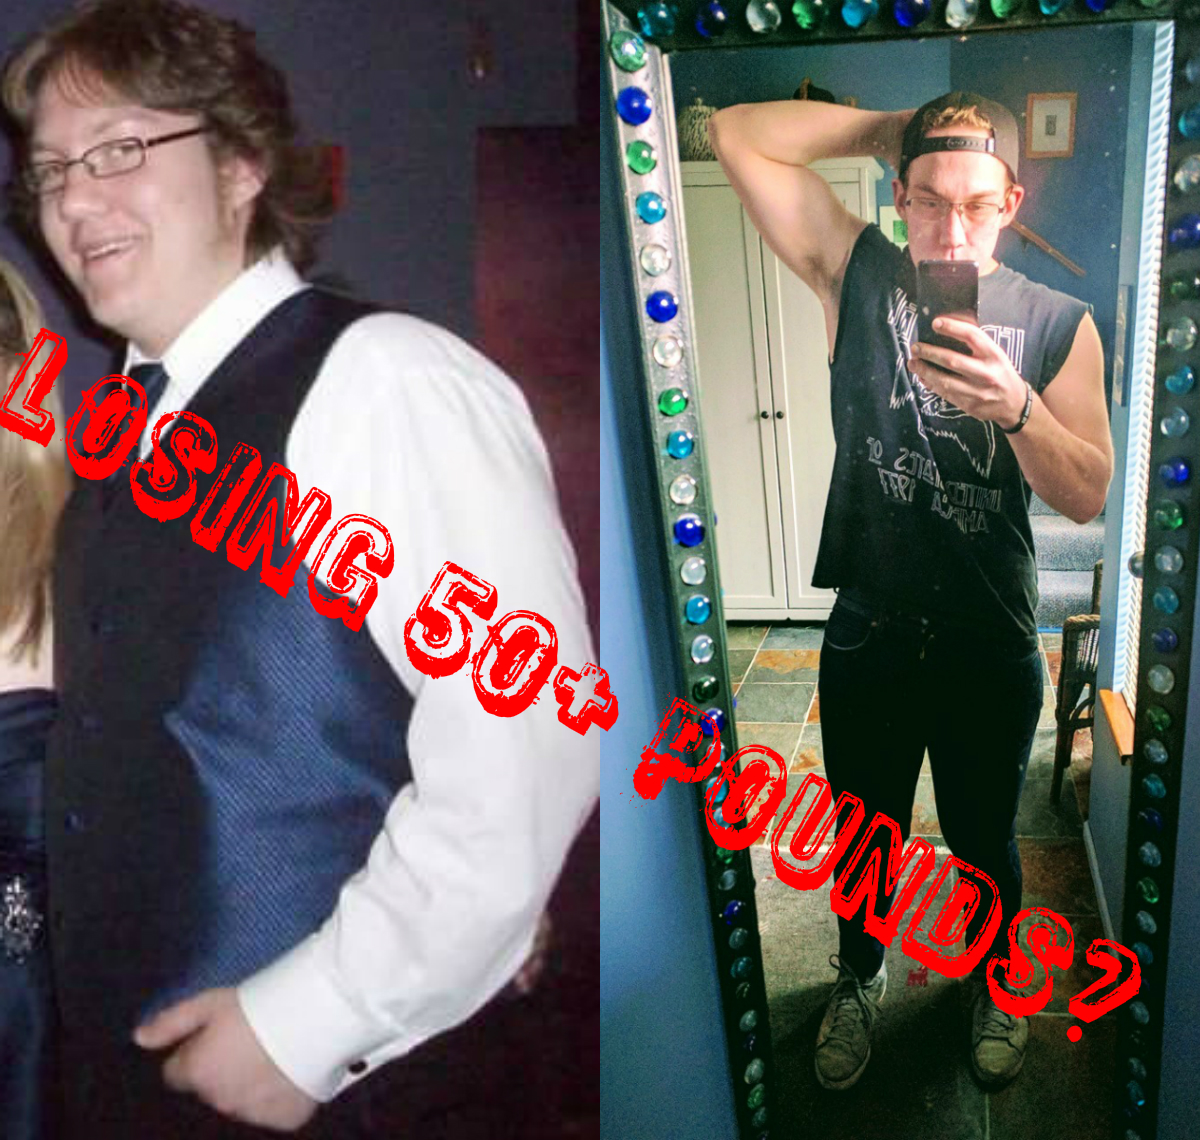 How I lost 50+ Pounds|What’s the Best Way to Lose Weight?